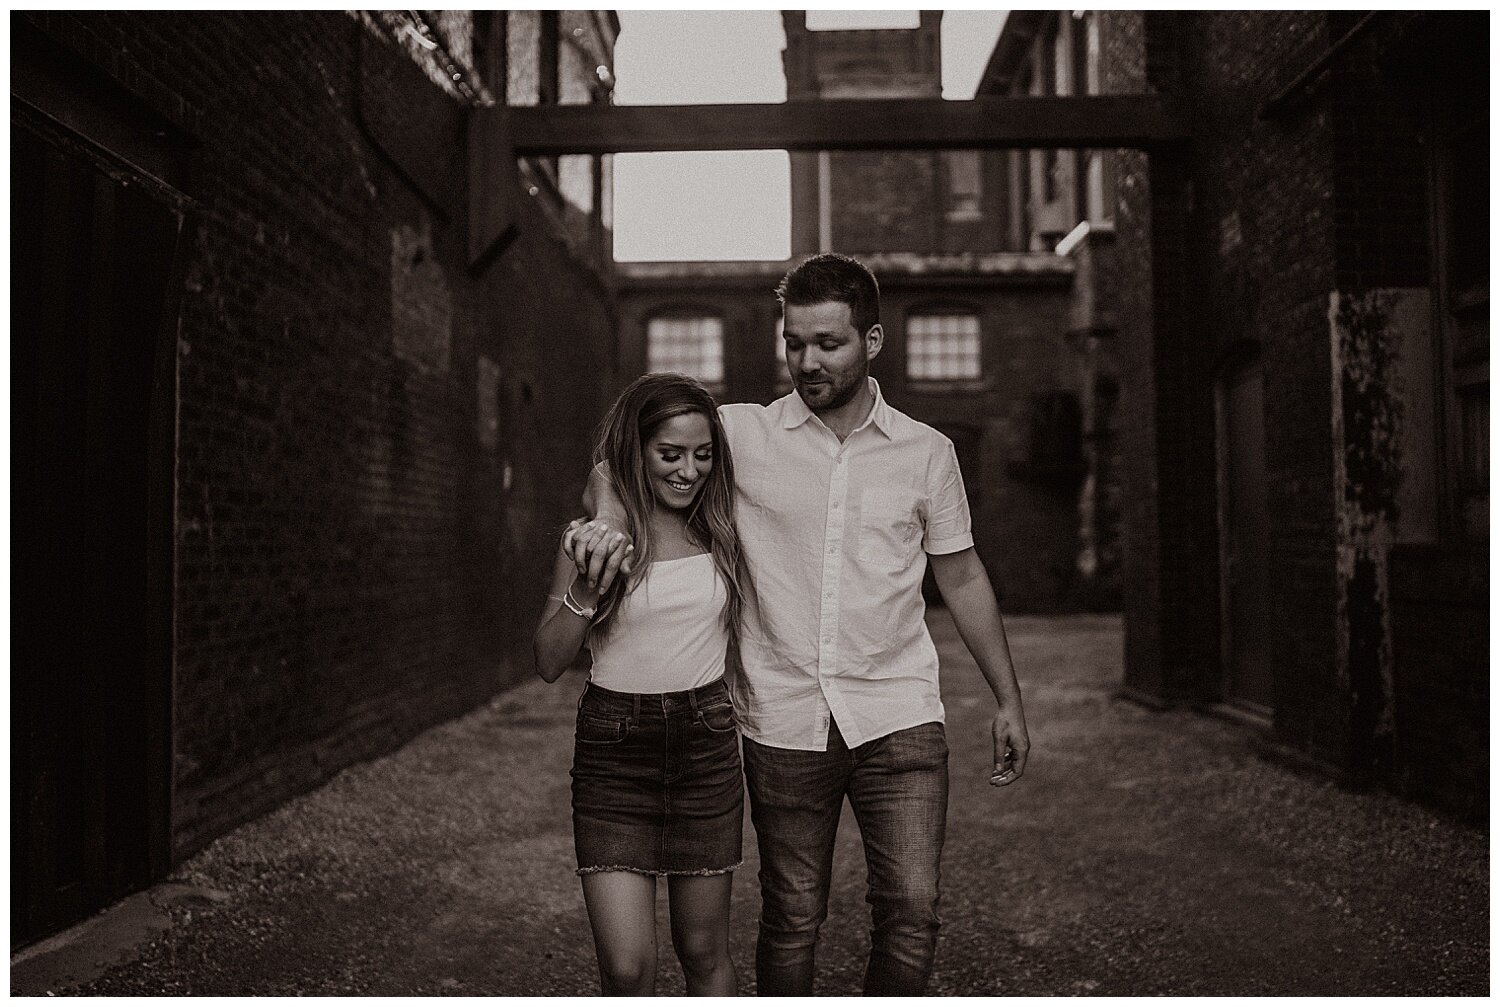 Cotton_Factory_And_Waterfall_Engagement_Session_Hamilton_Ontario_Wedding_Photographer_0077.jpg